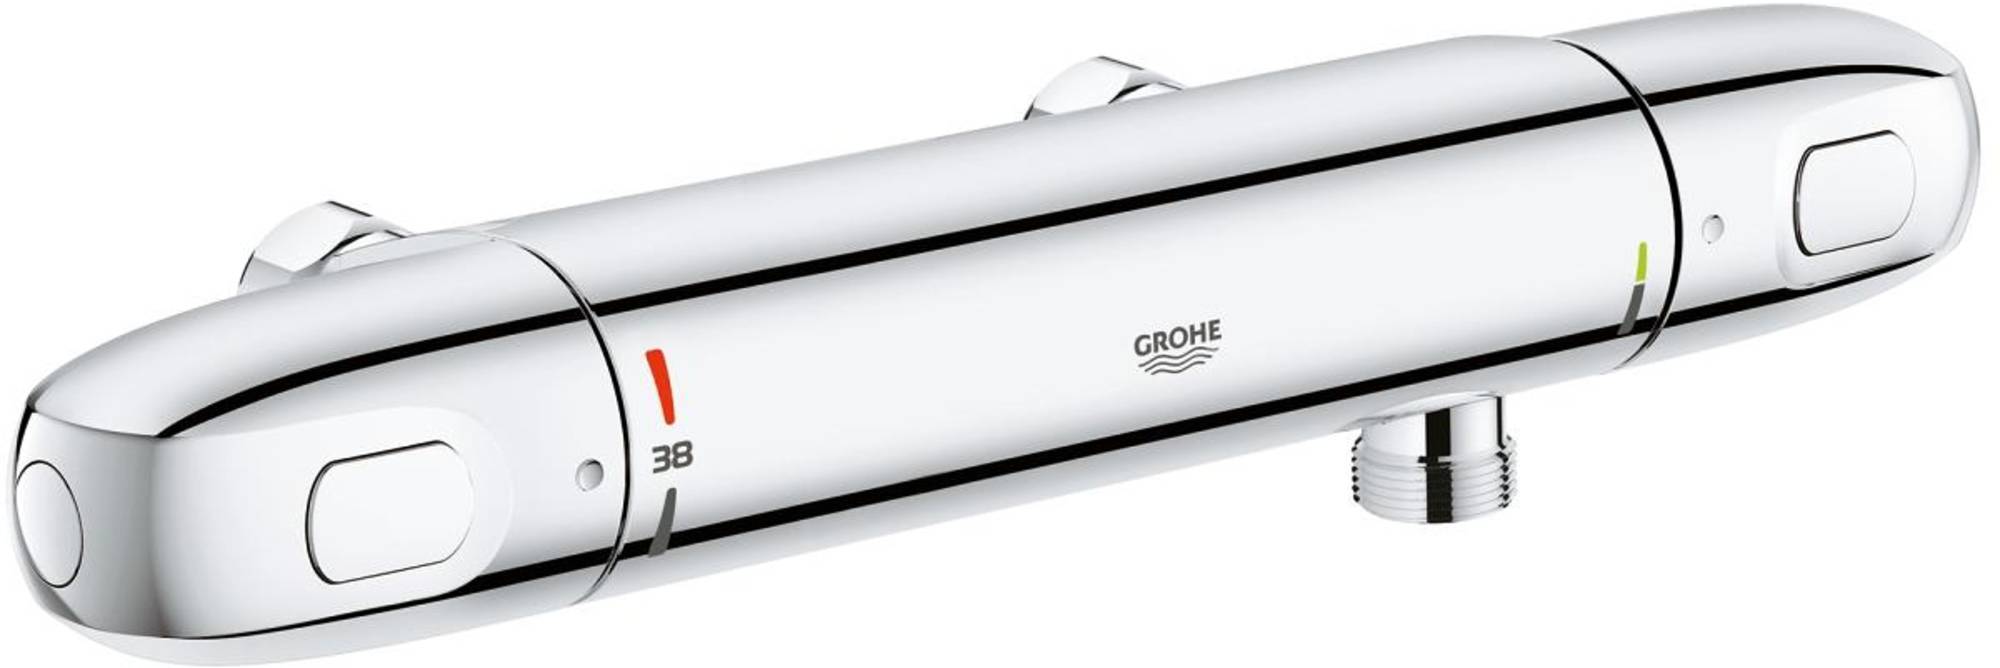 Grohe Grohtherm-1000 New douchethermostaat - Chroom